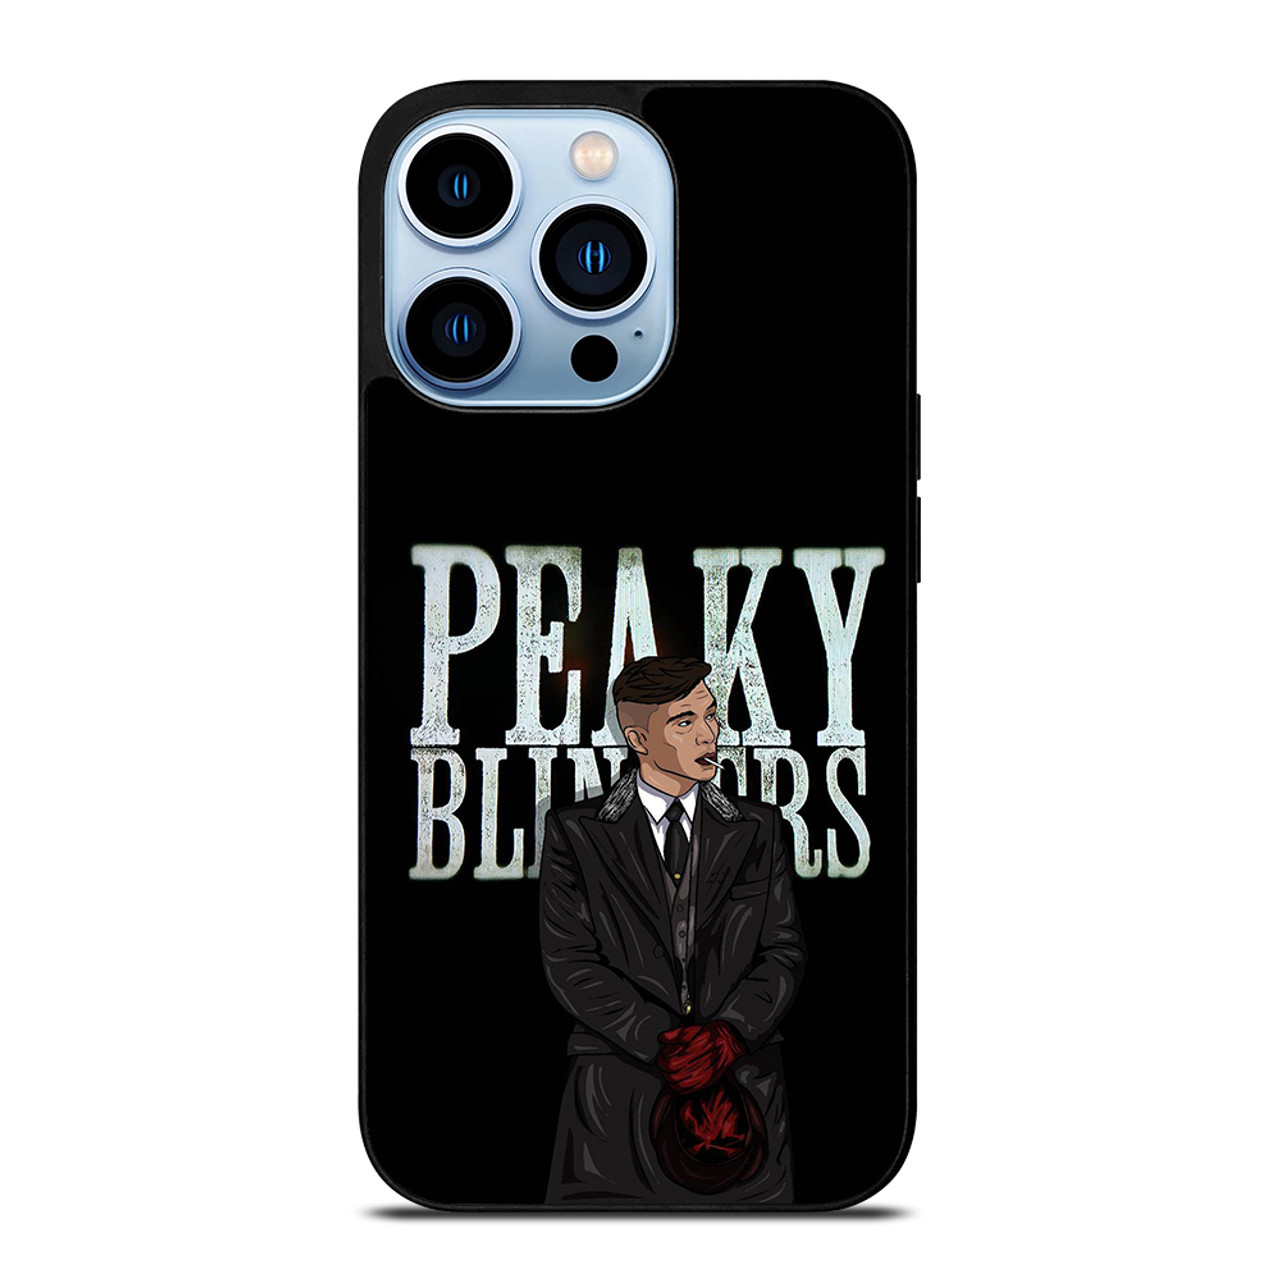 https://cdn11.bigcommerce.com/s-1obwgivpkz/images/stencil/1280x1280/products/185867/212649/SHELBY%20PEAKY%20BLINDERS%20ART__28500.1700387738.jpg?c=1